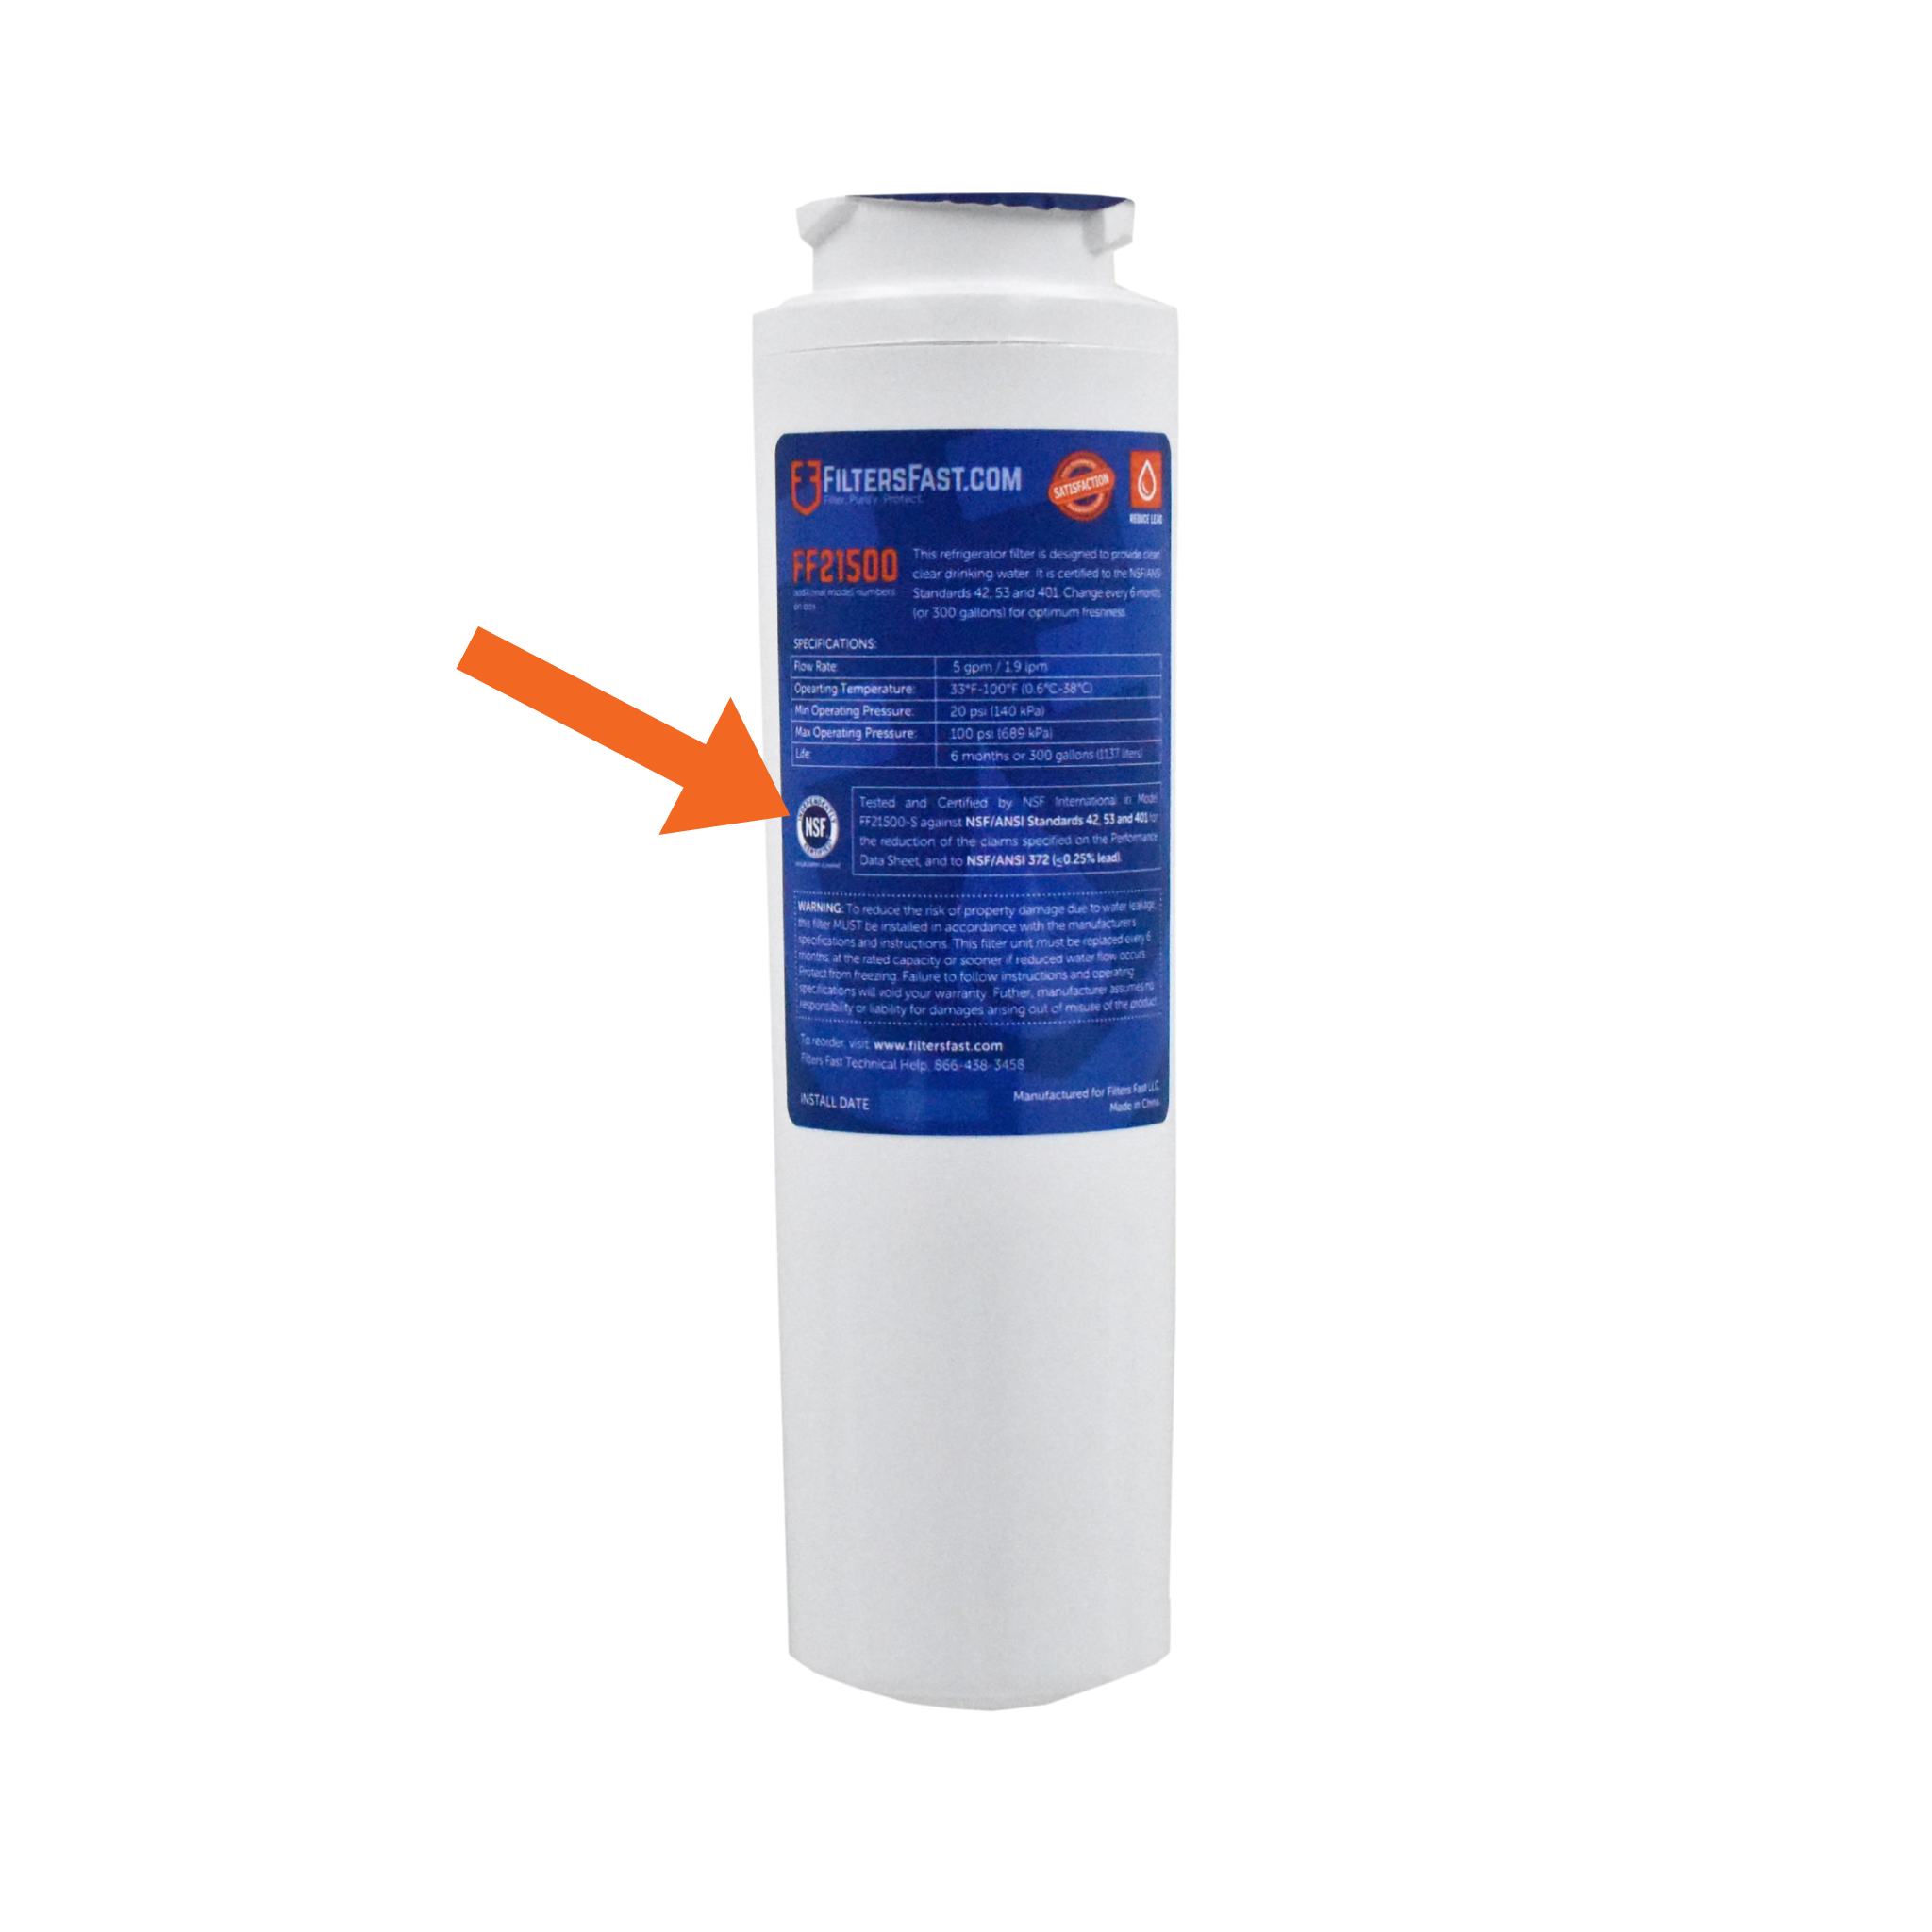 The Filters Fast FF21500 has an arrow pointing to the NSF Certified seal